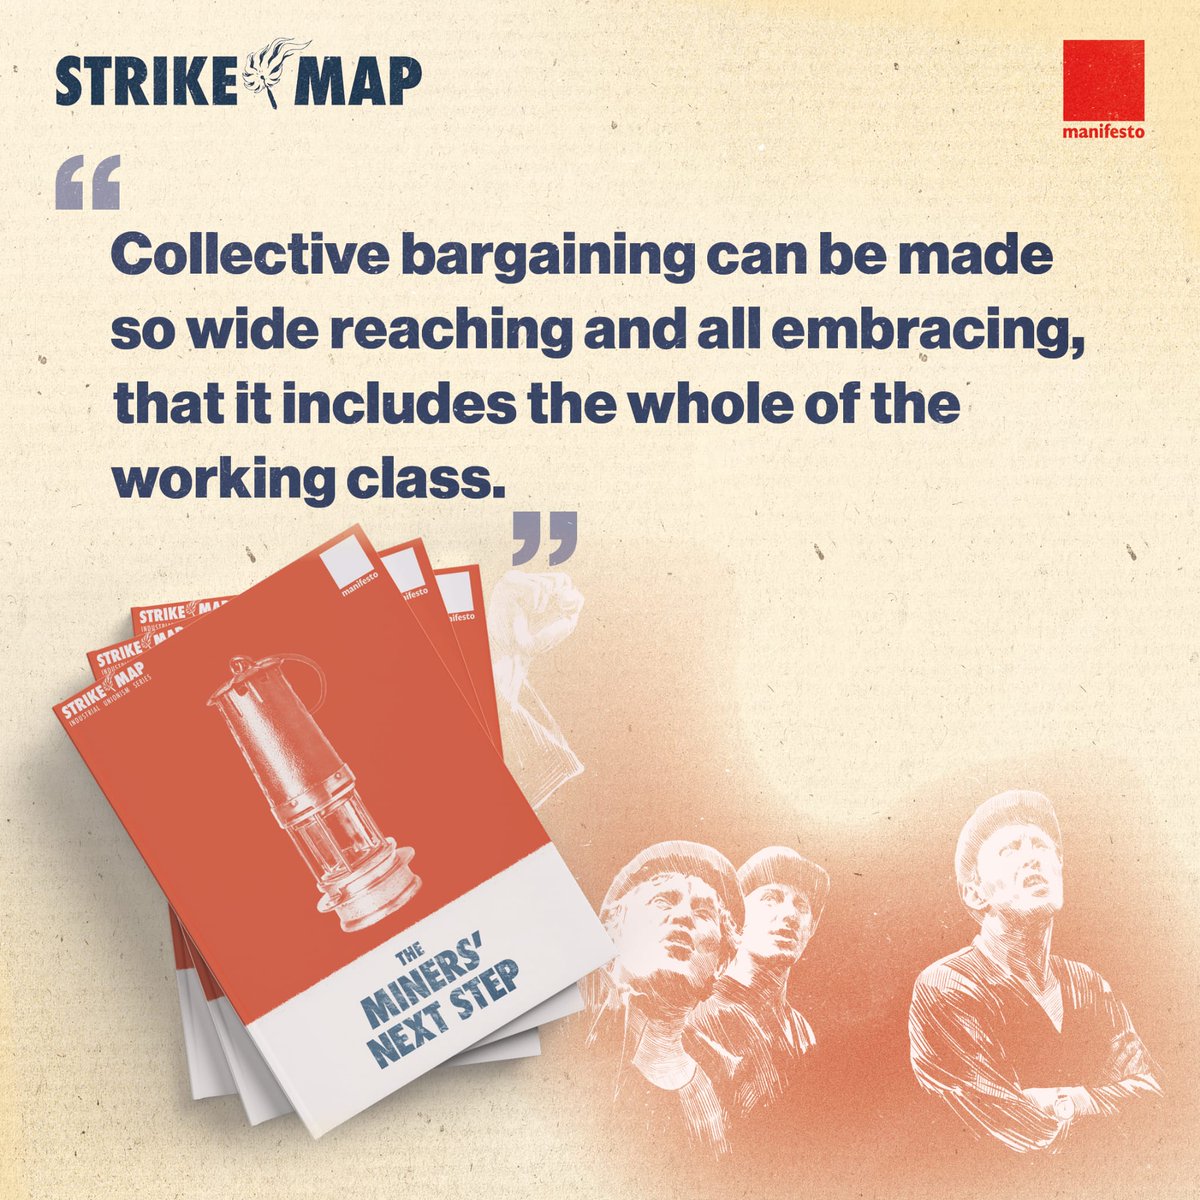 ⛏️The Miners' Next Step is a seminal pamphlet in labour and trade union history, and ranks alongside the Communist Manifesto in its revolutionary implications. 🛒Pre-order your copies here: bit.ly/MinersNextStep… Launching at this year's @DurhamGala #StrikeMap #Miners…